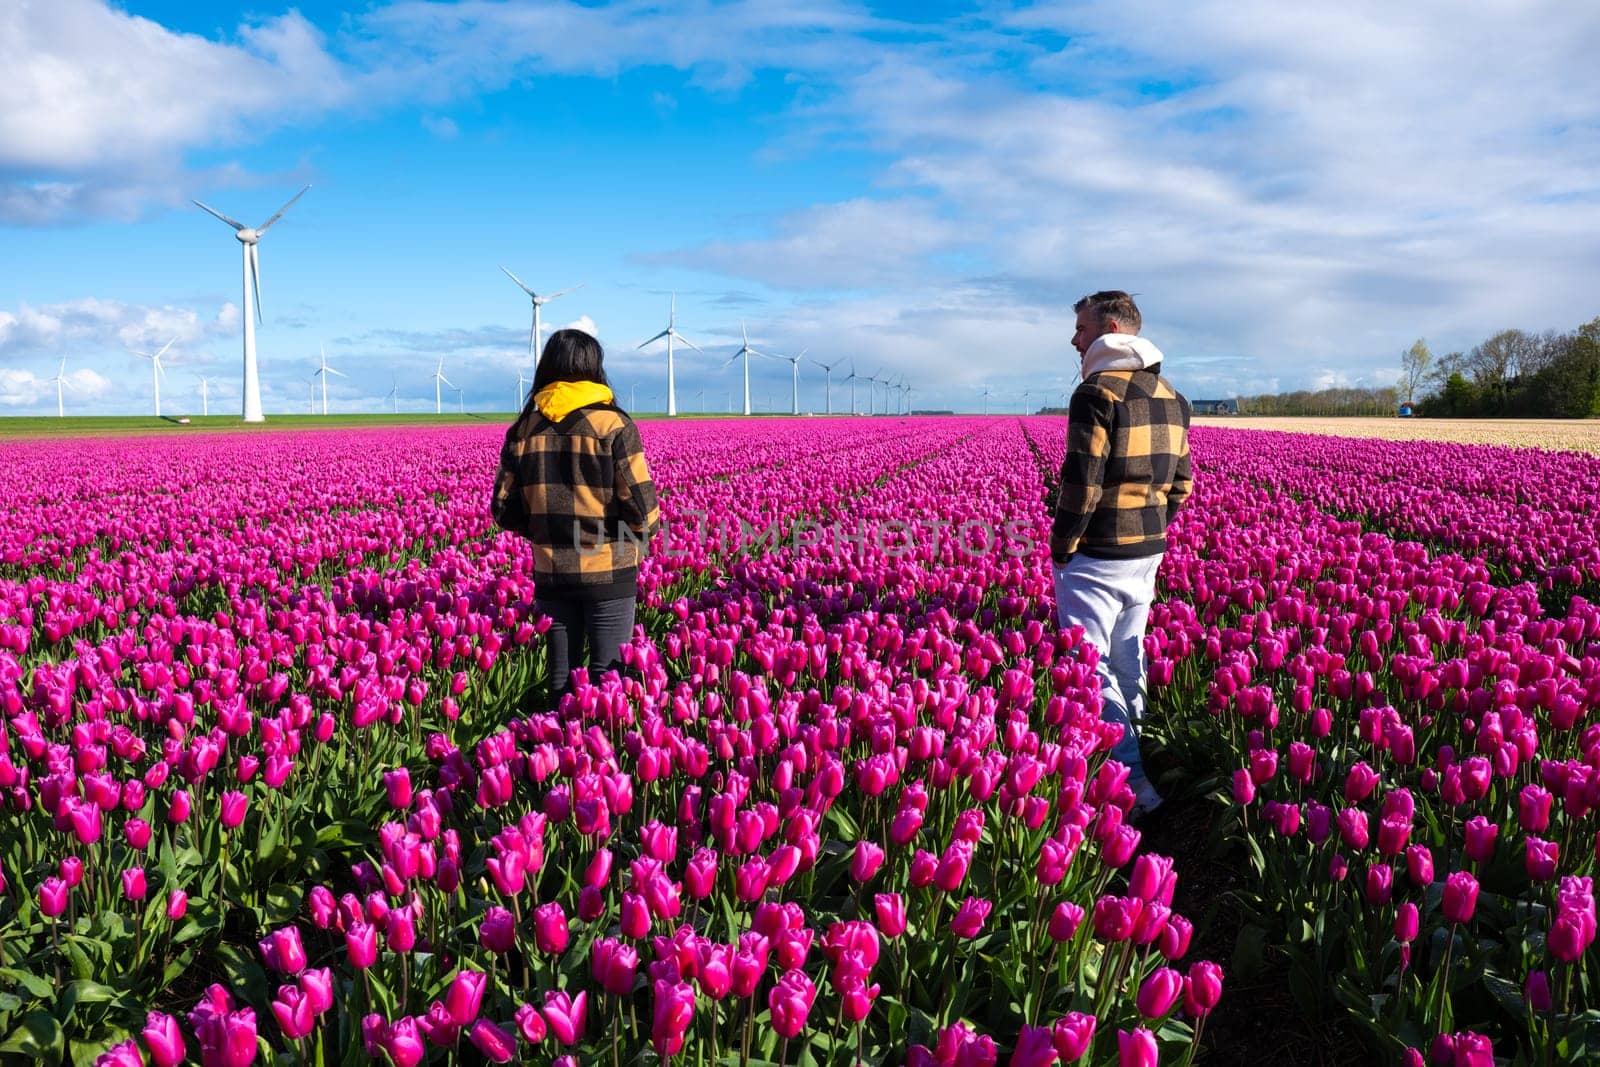 Two people stand amidst a vibrant field of purple tulips in the Dutch countryside, surrounded by towering windmill turbines on a breezy Spring day by fokkebok